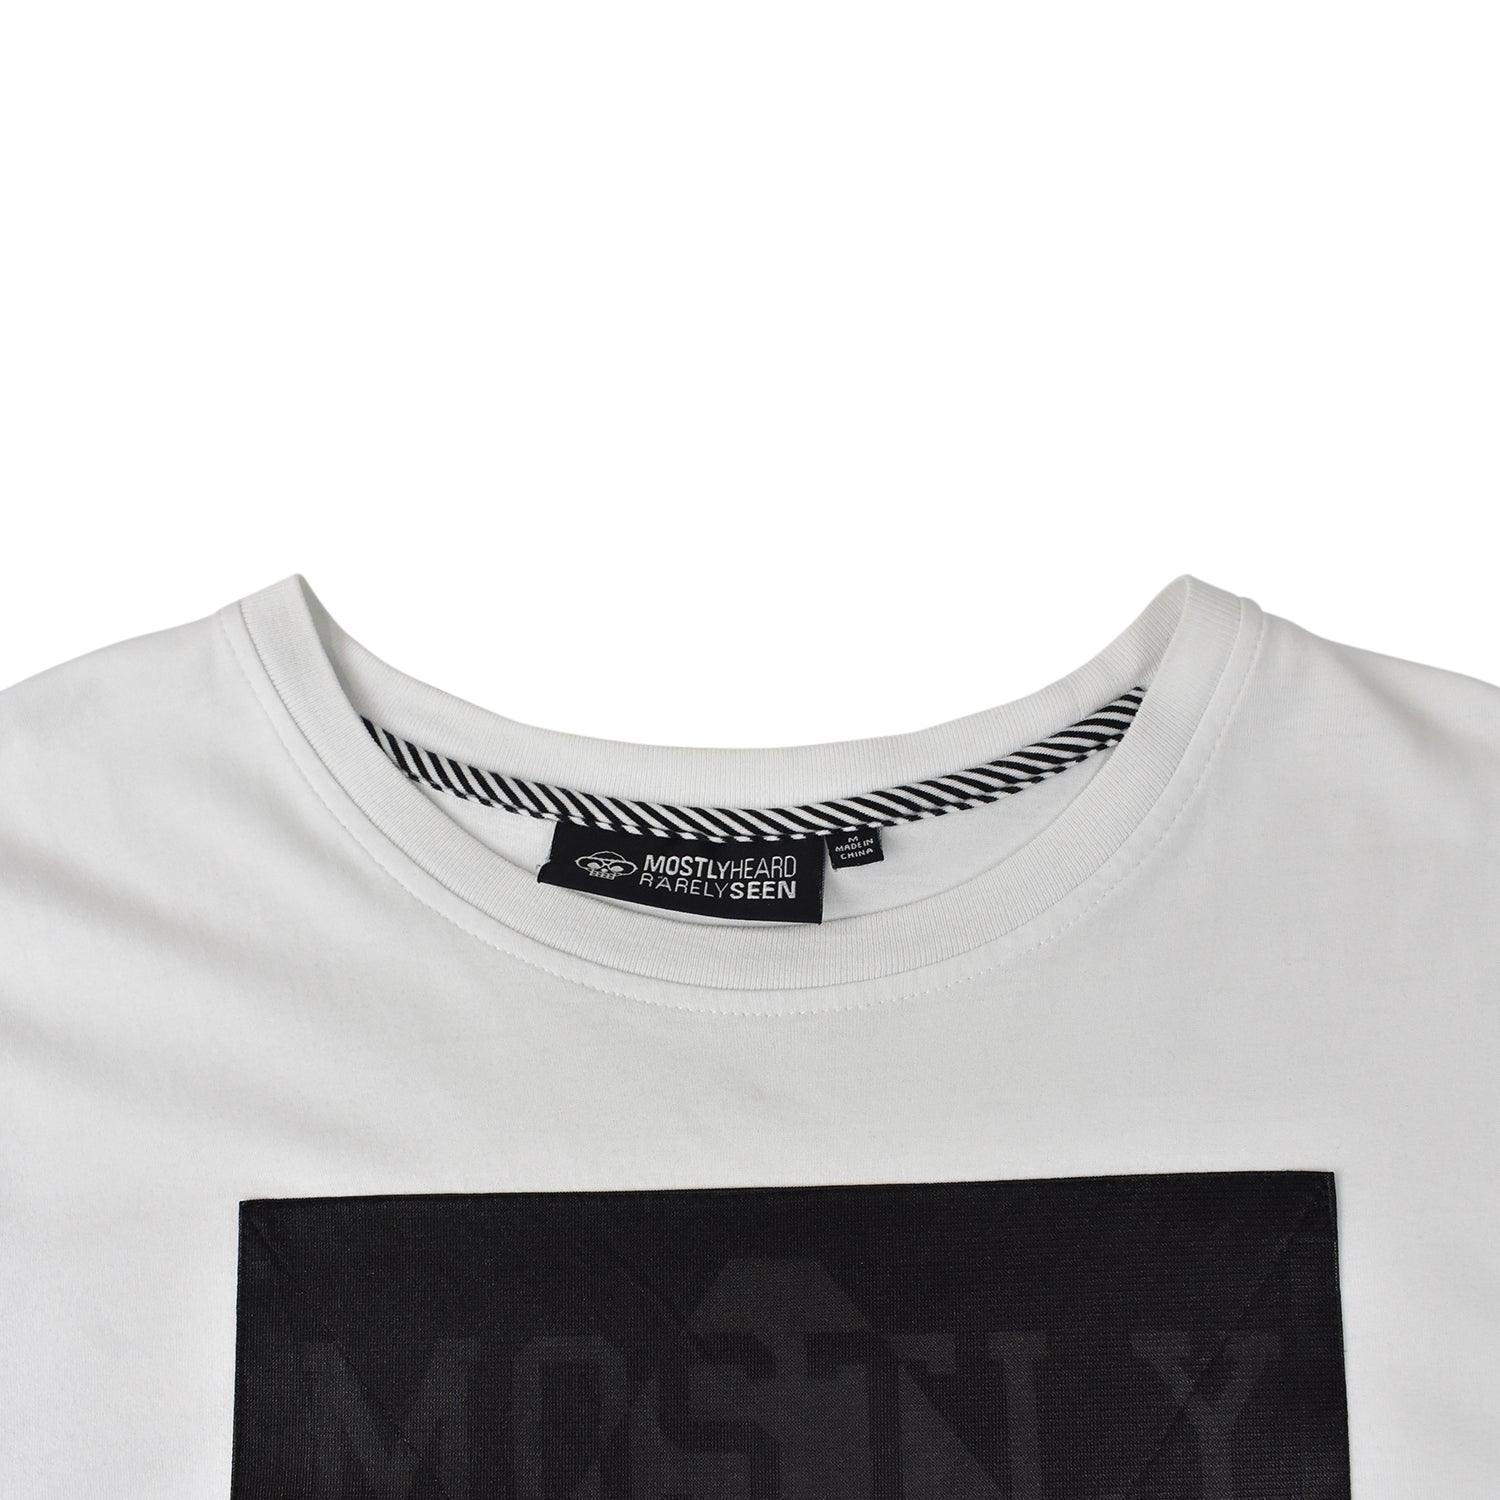 Mostly Heard Rarely Seen T-Shirt - Men's M - Fashionably Yours